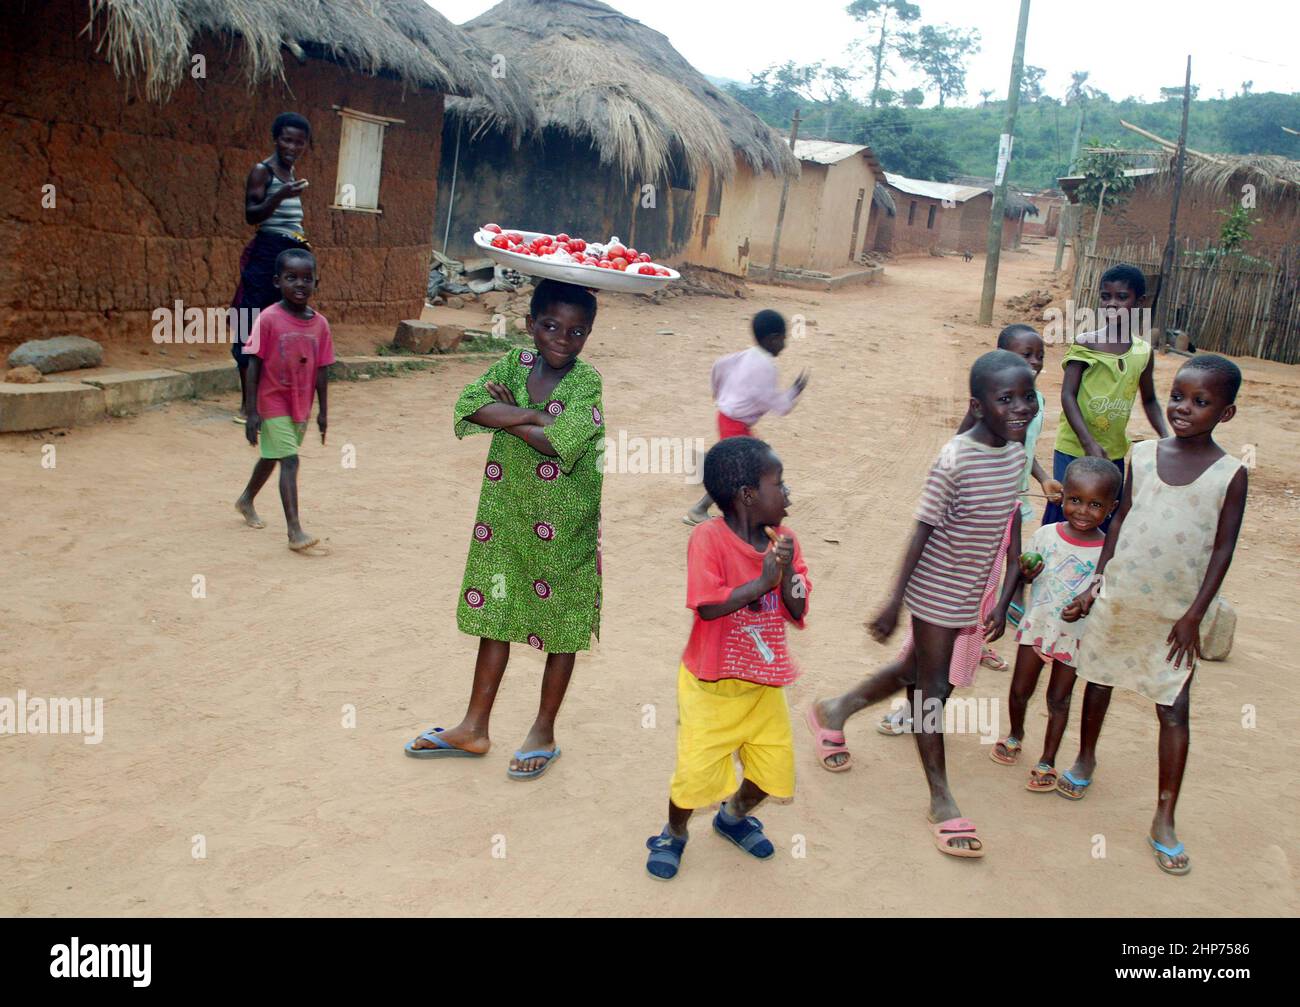 Children in Ghana in Village.Child carrying tray on head. West Africa Stock Photo